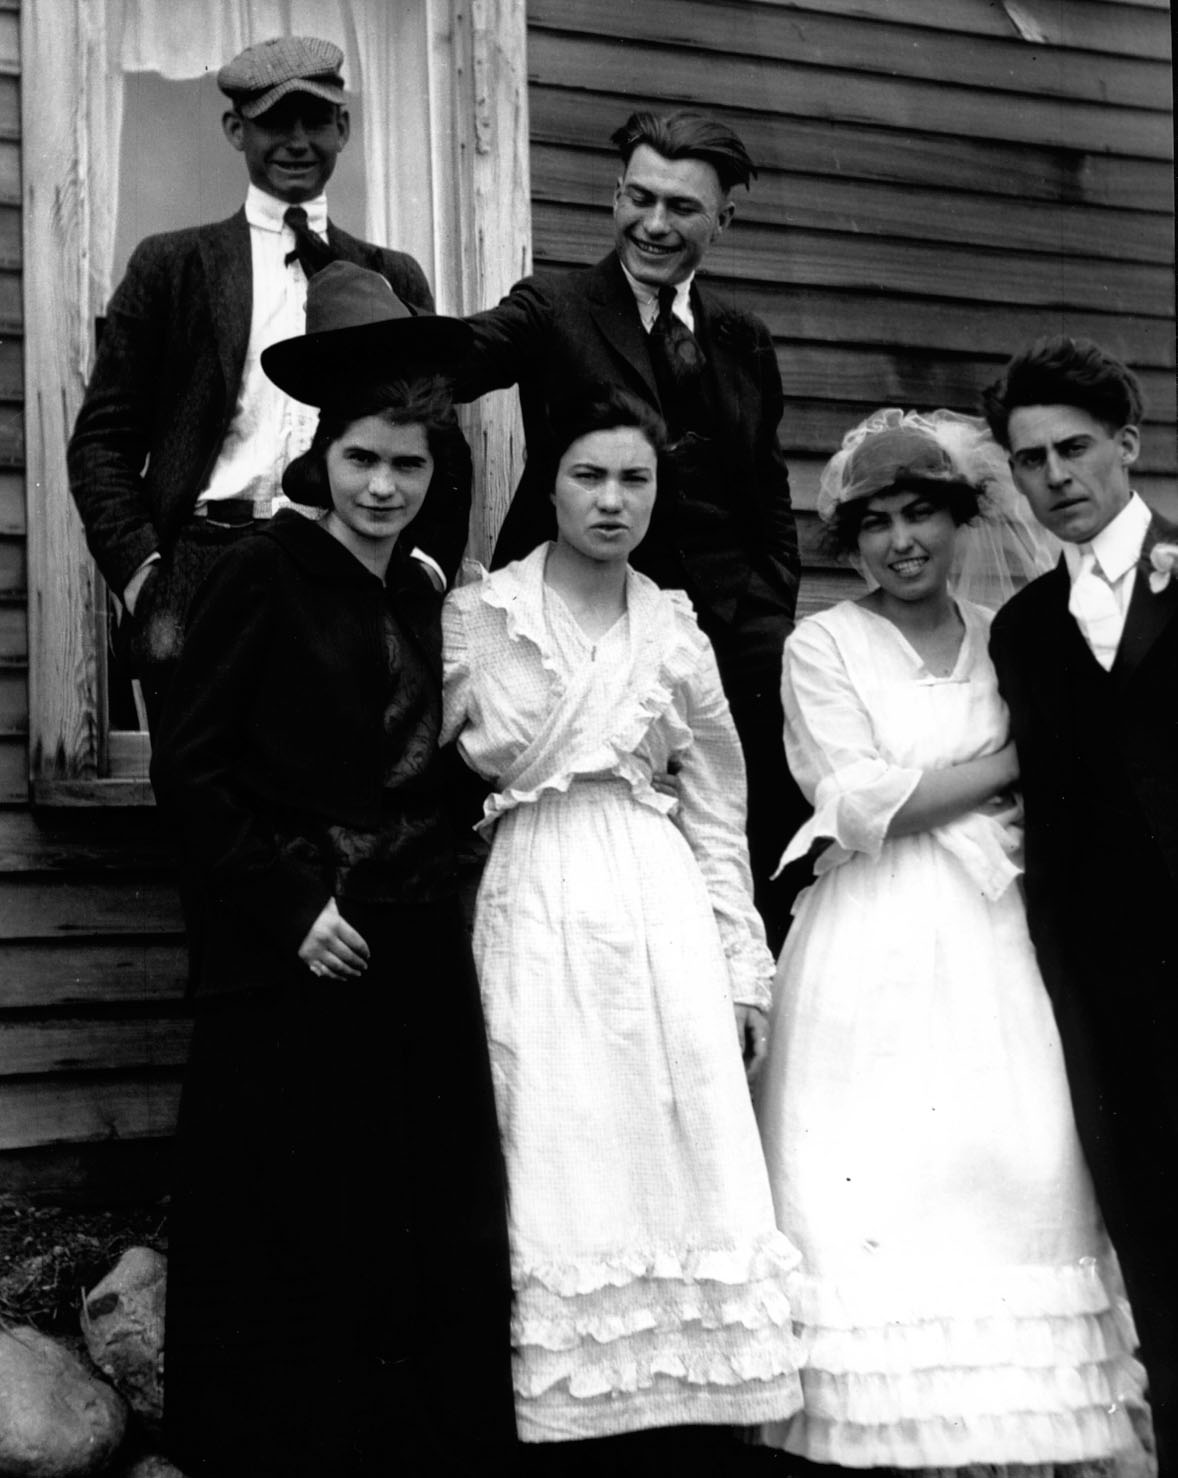 Wilford and Marie Cole and their wedding party enjoy the day in Plentywood, Montana in 1920.